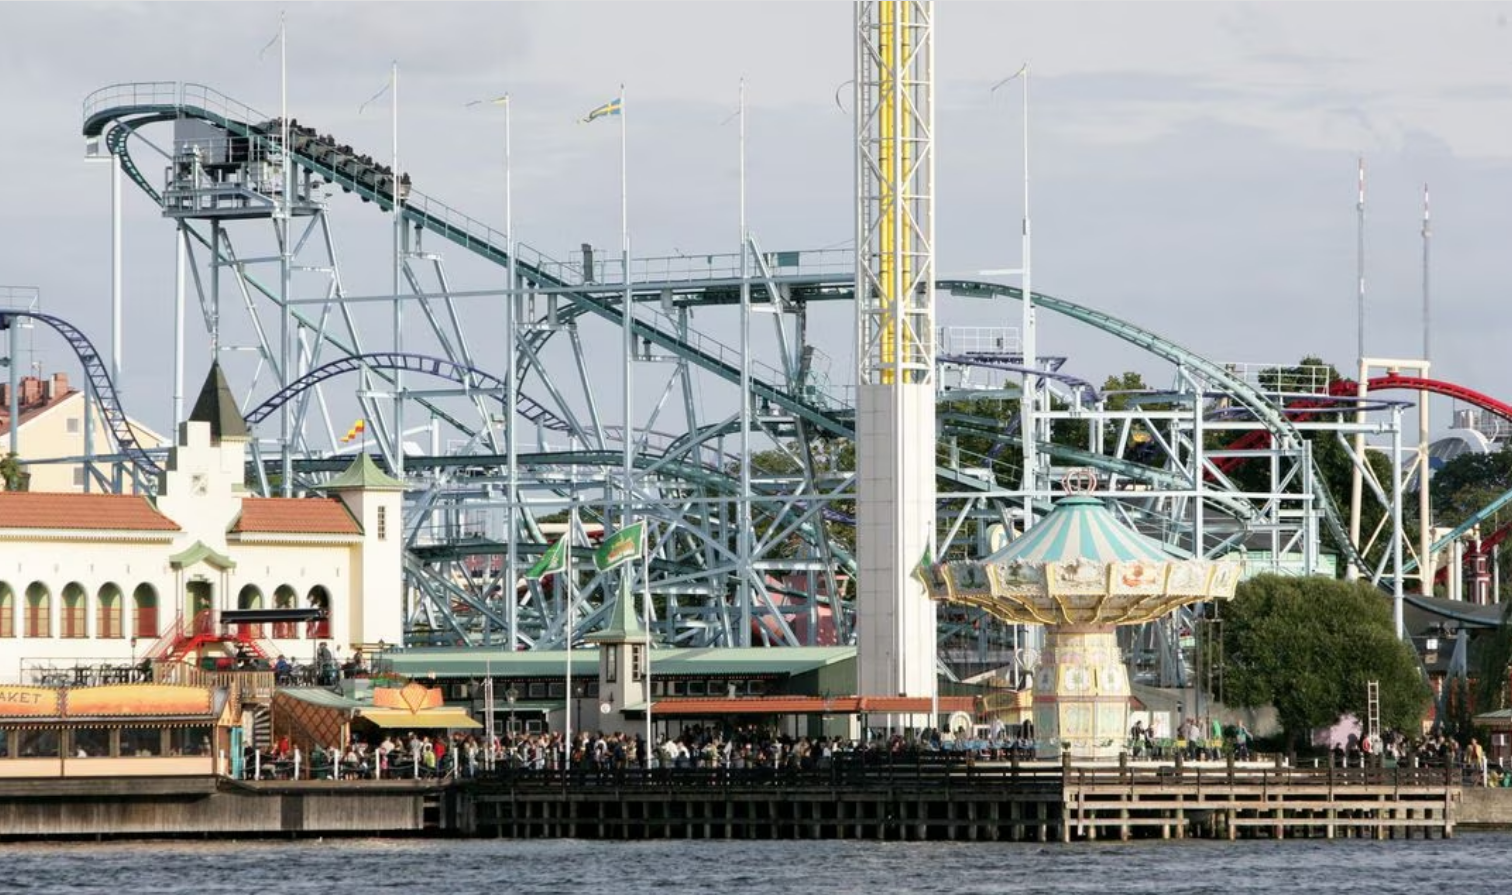 People visit Grona Lund amusement park in Stockholm, Sweden, September 5, 2009. A fatal accident took place on the park's roller coaster Jetline on June 25, 2023, according to local media. Photo: Reuters